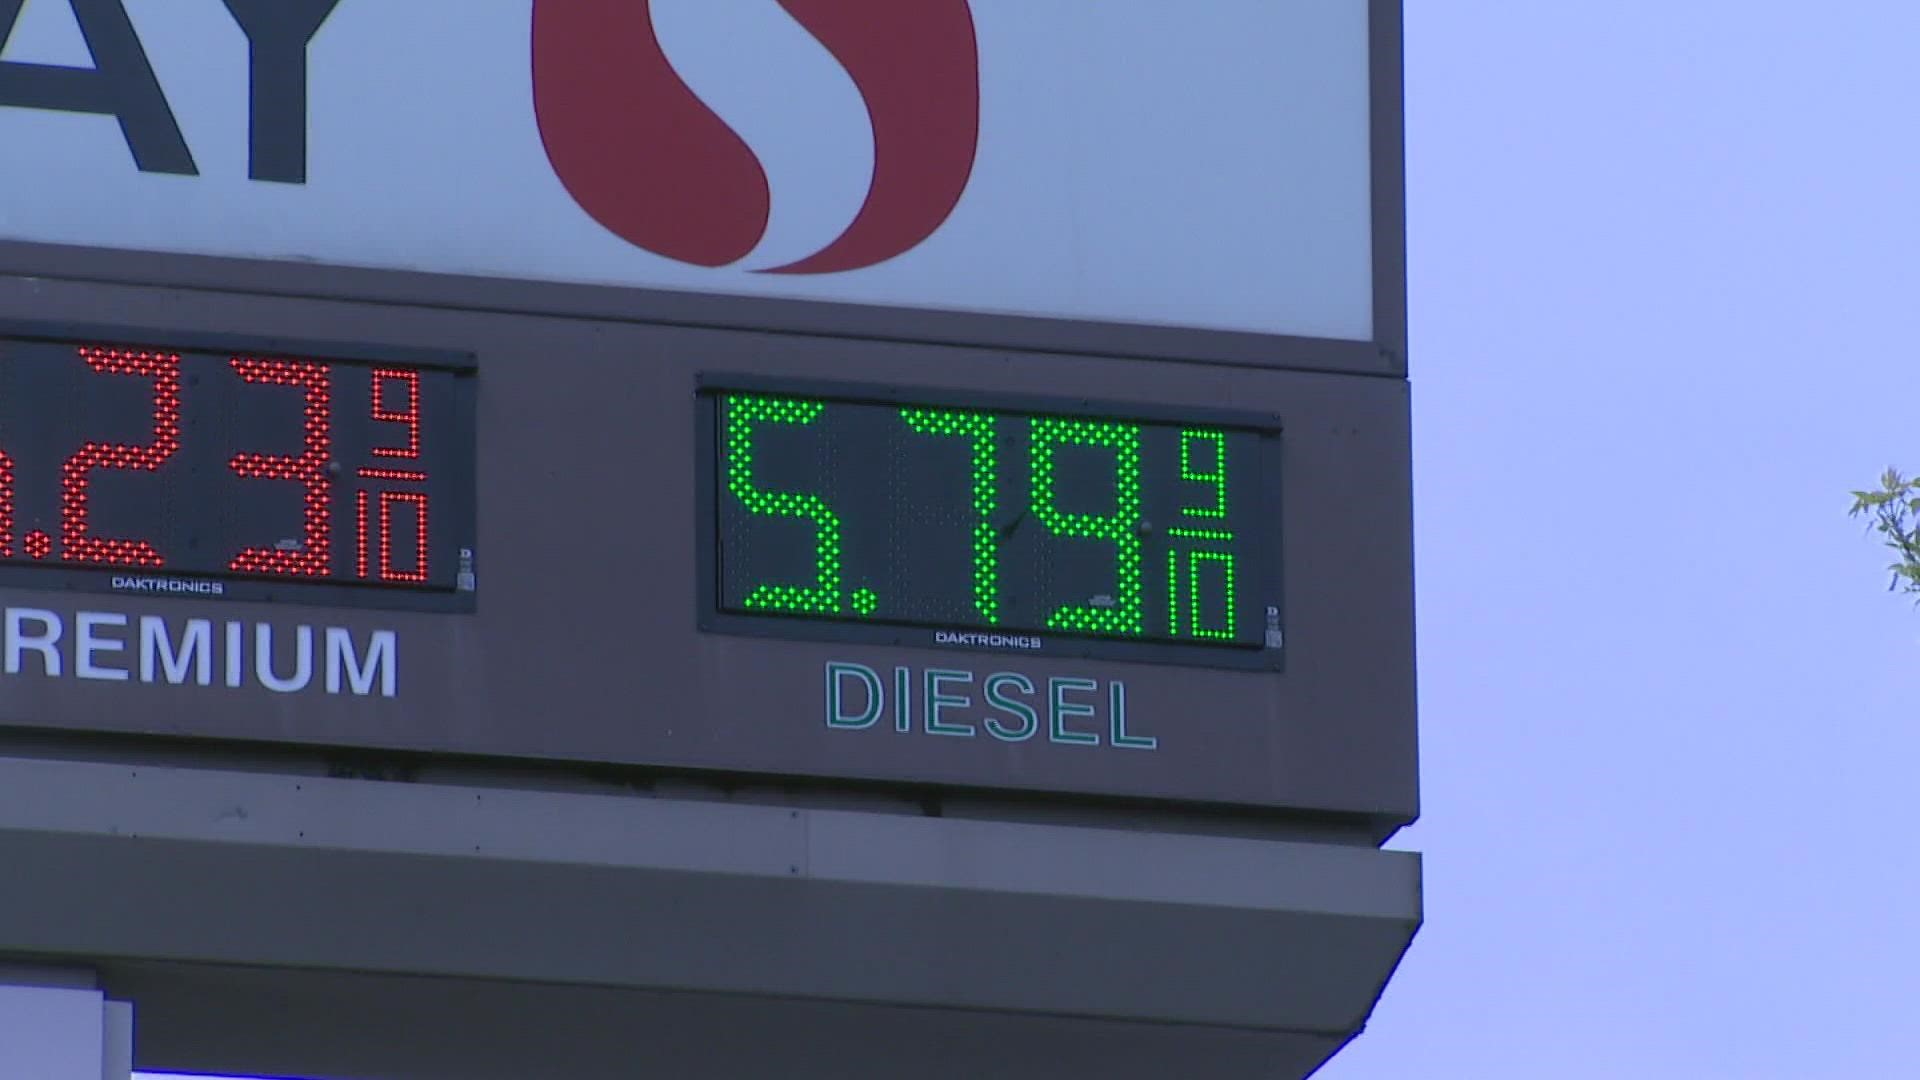 One industry analyst warns a gallon of diesel could hit $10 by the end of the summer.